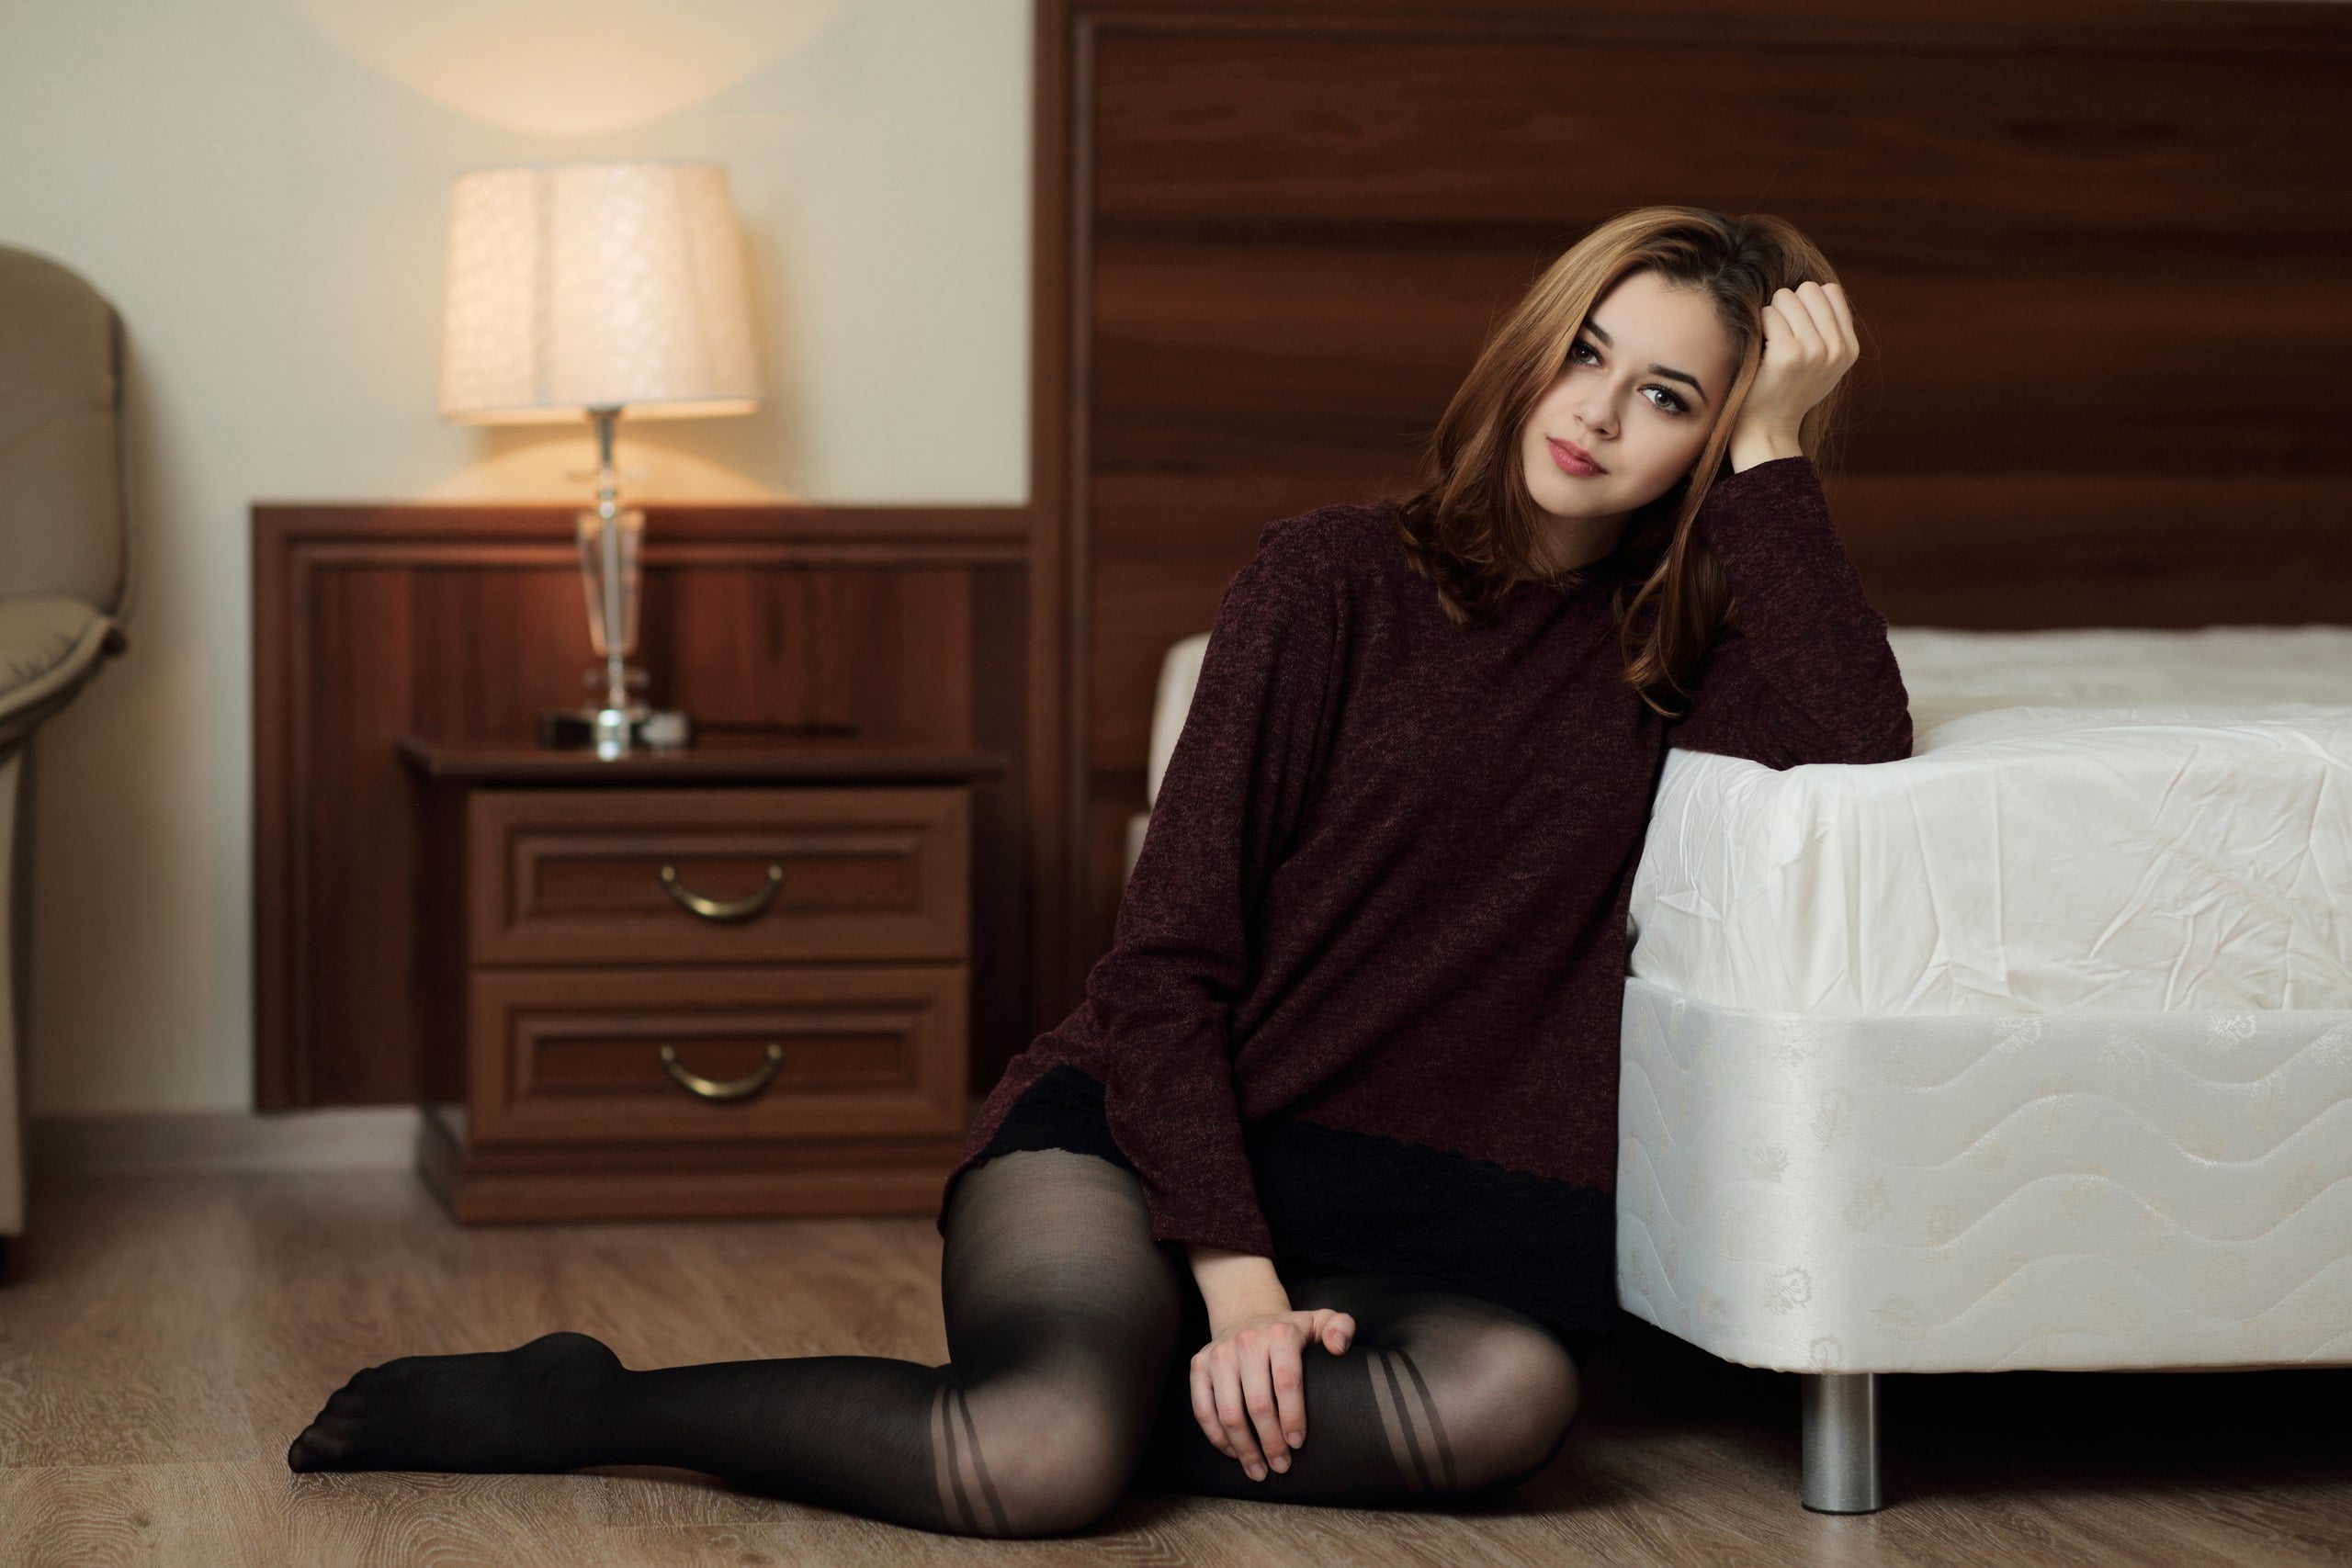 Woman wearing brown sweater and black stockings leaning on white bed HD ...